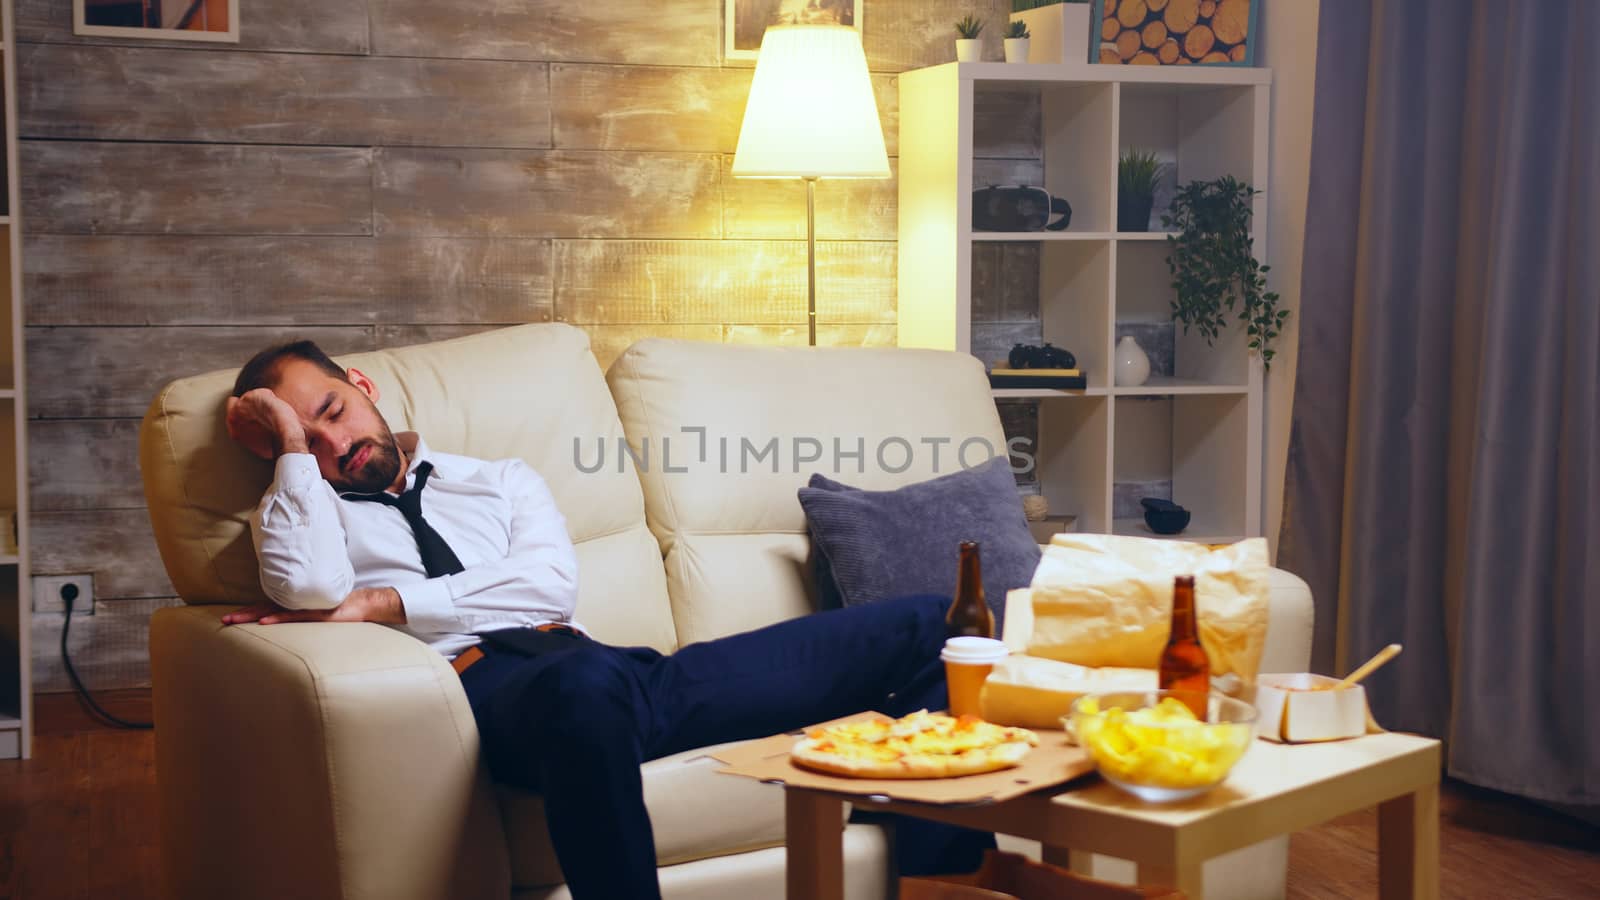 Overworked businessman sleeping on the couch with tv turned on and junk food on the table.